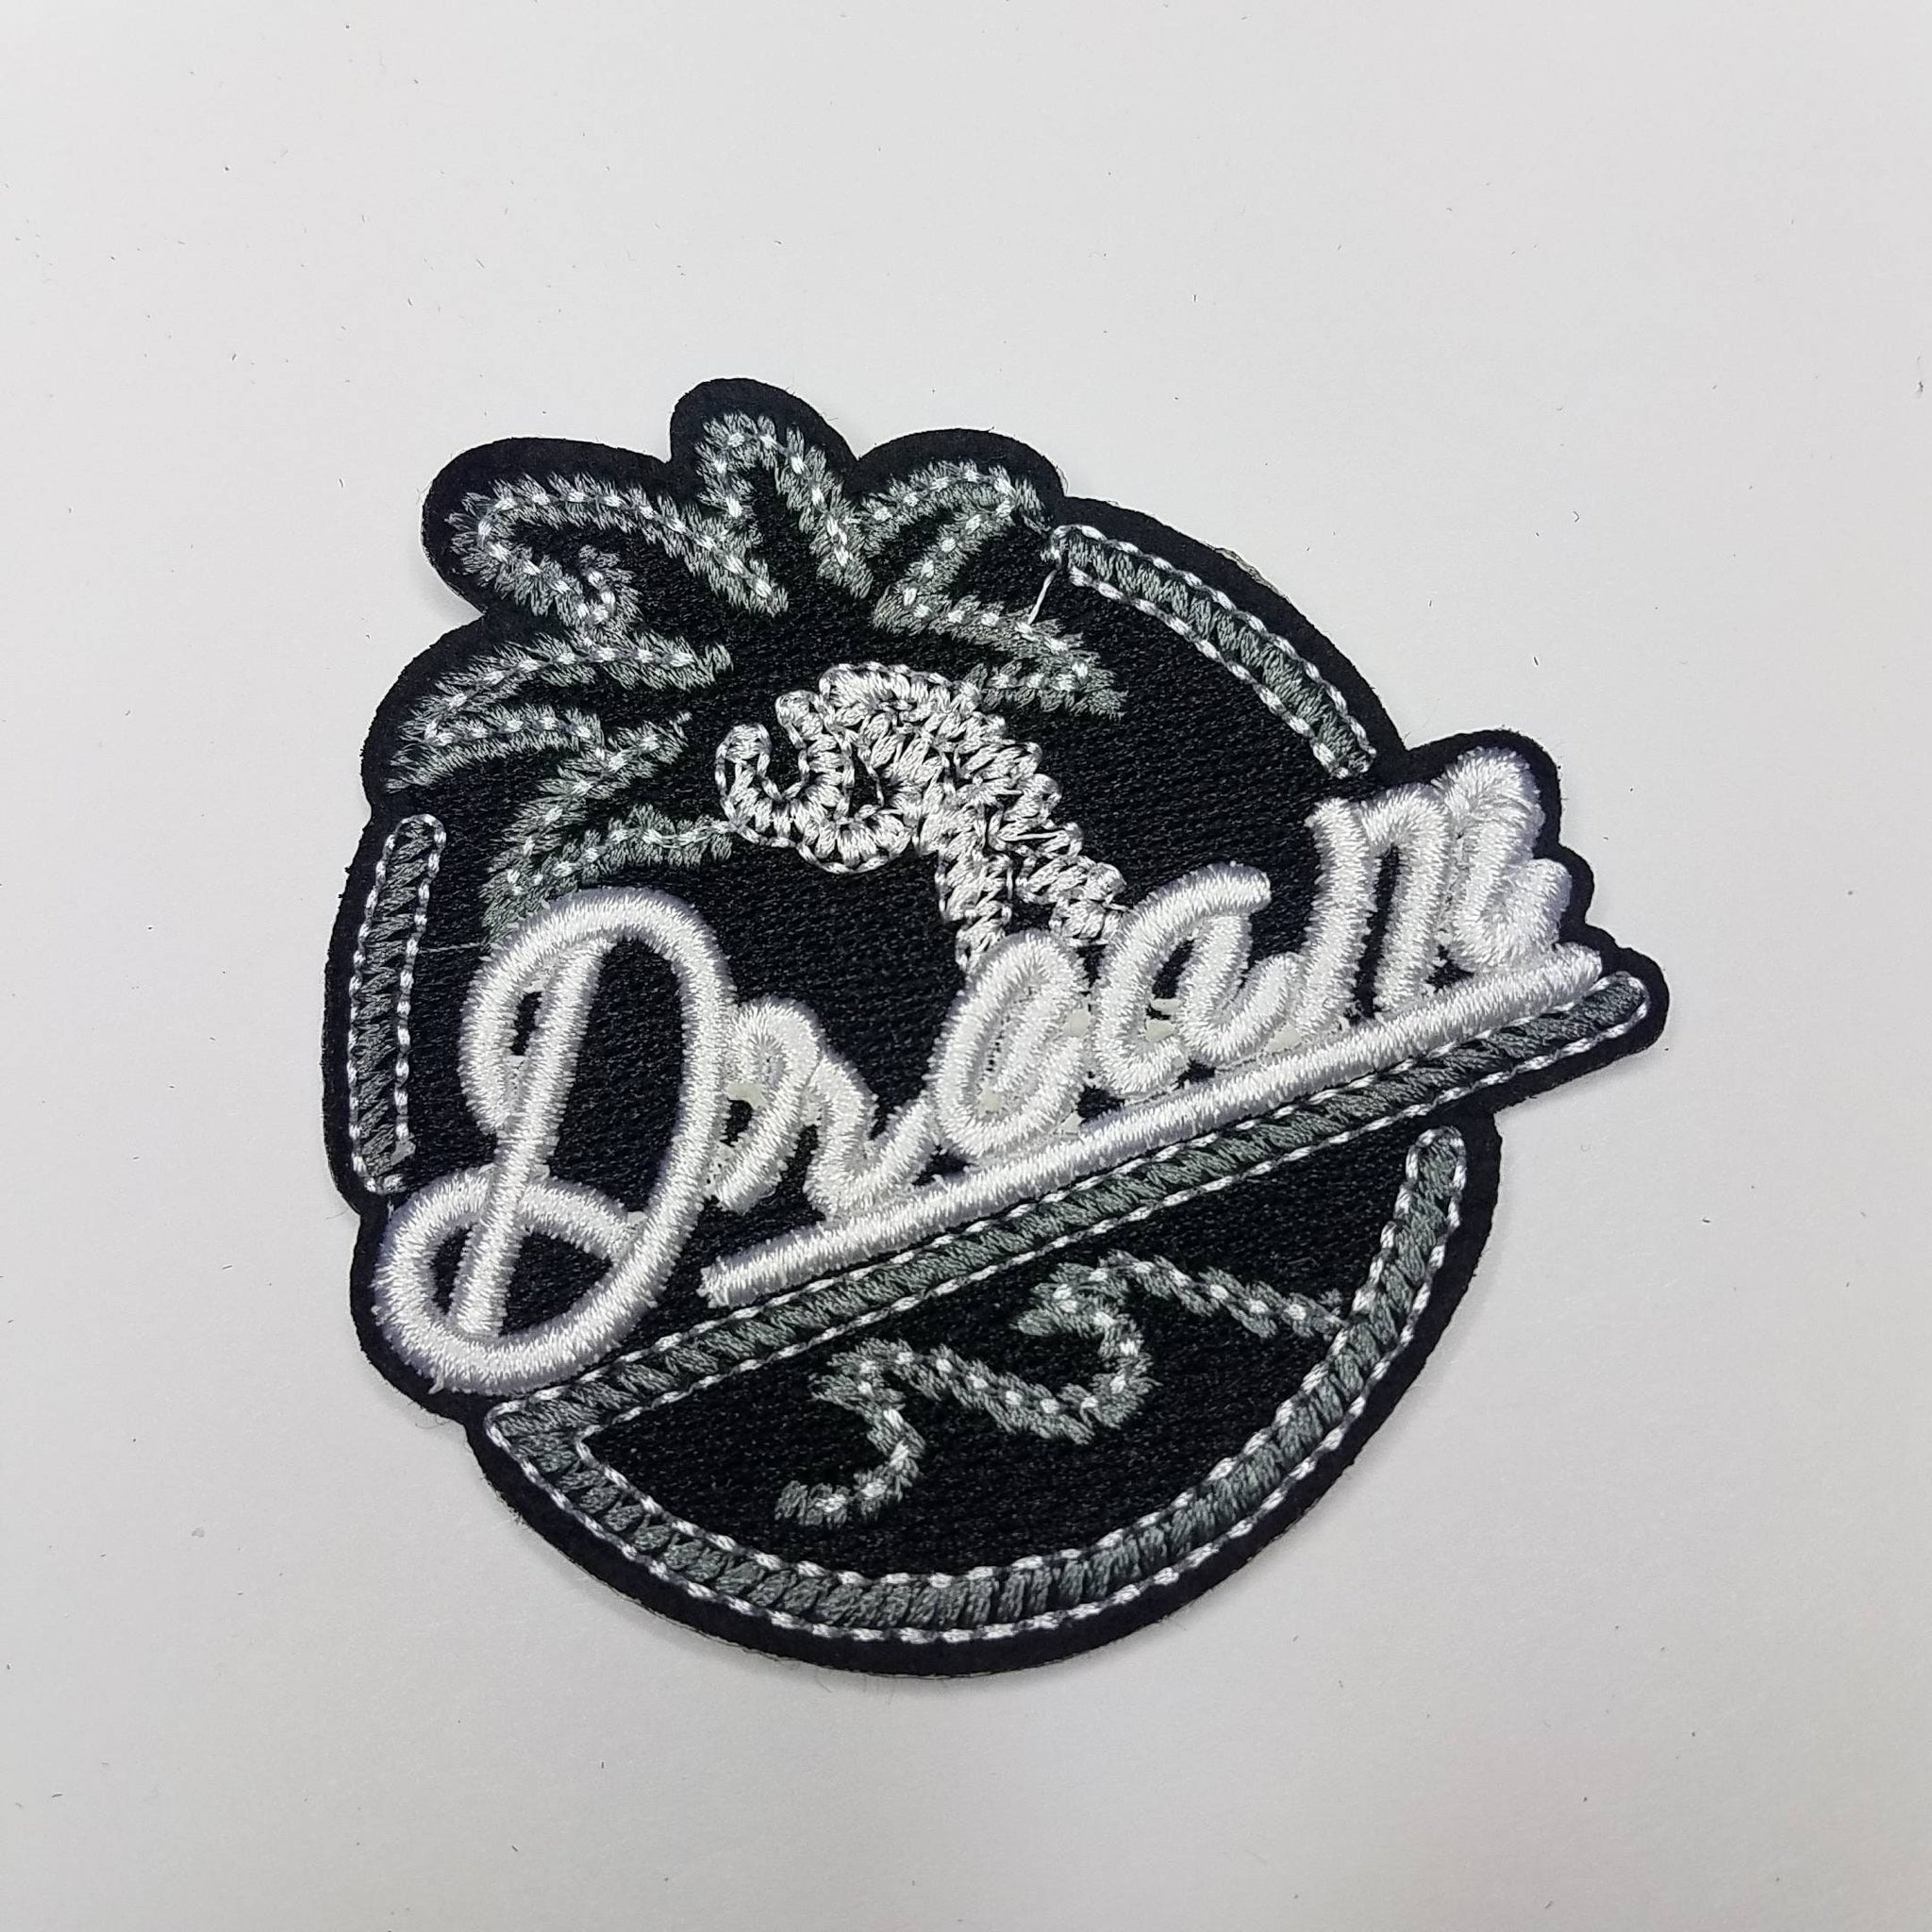 Black, Grey, & White "Palm Tree Dream" Iron on  Embroidered Patch, Statement Applique, Cool patch for clothing, 3-inch x 3-inch badge